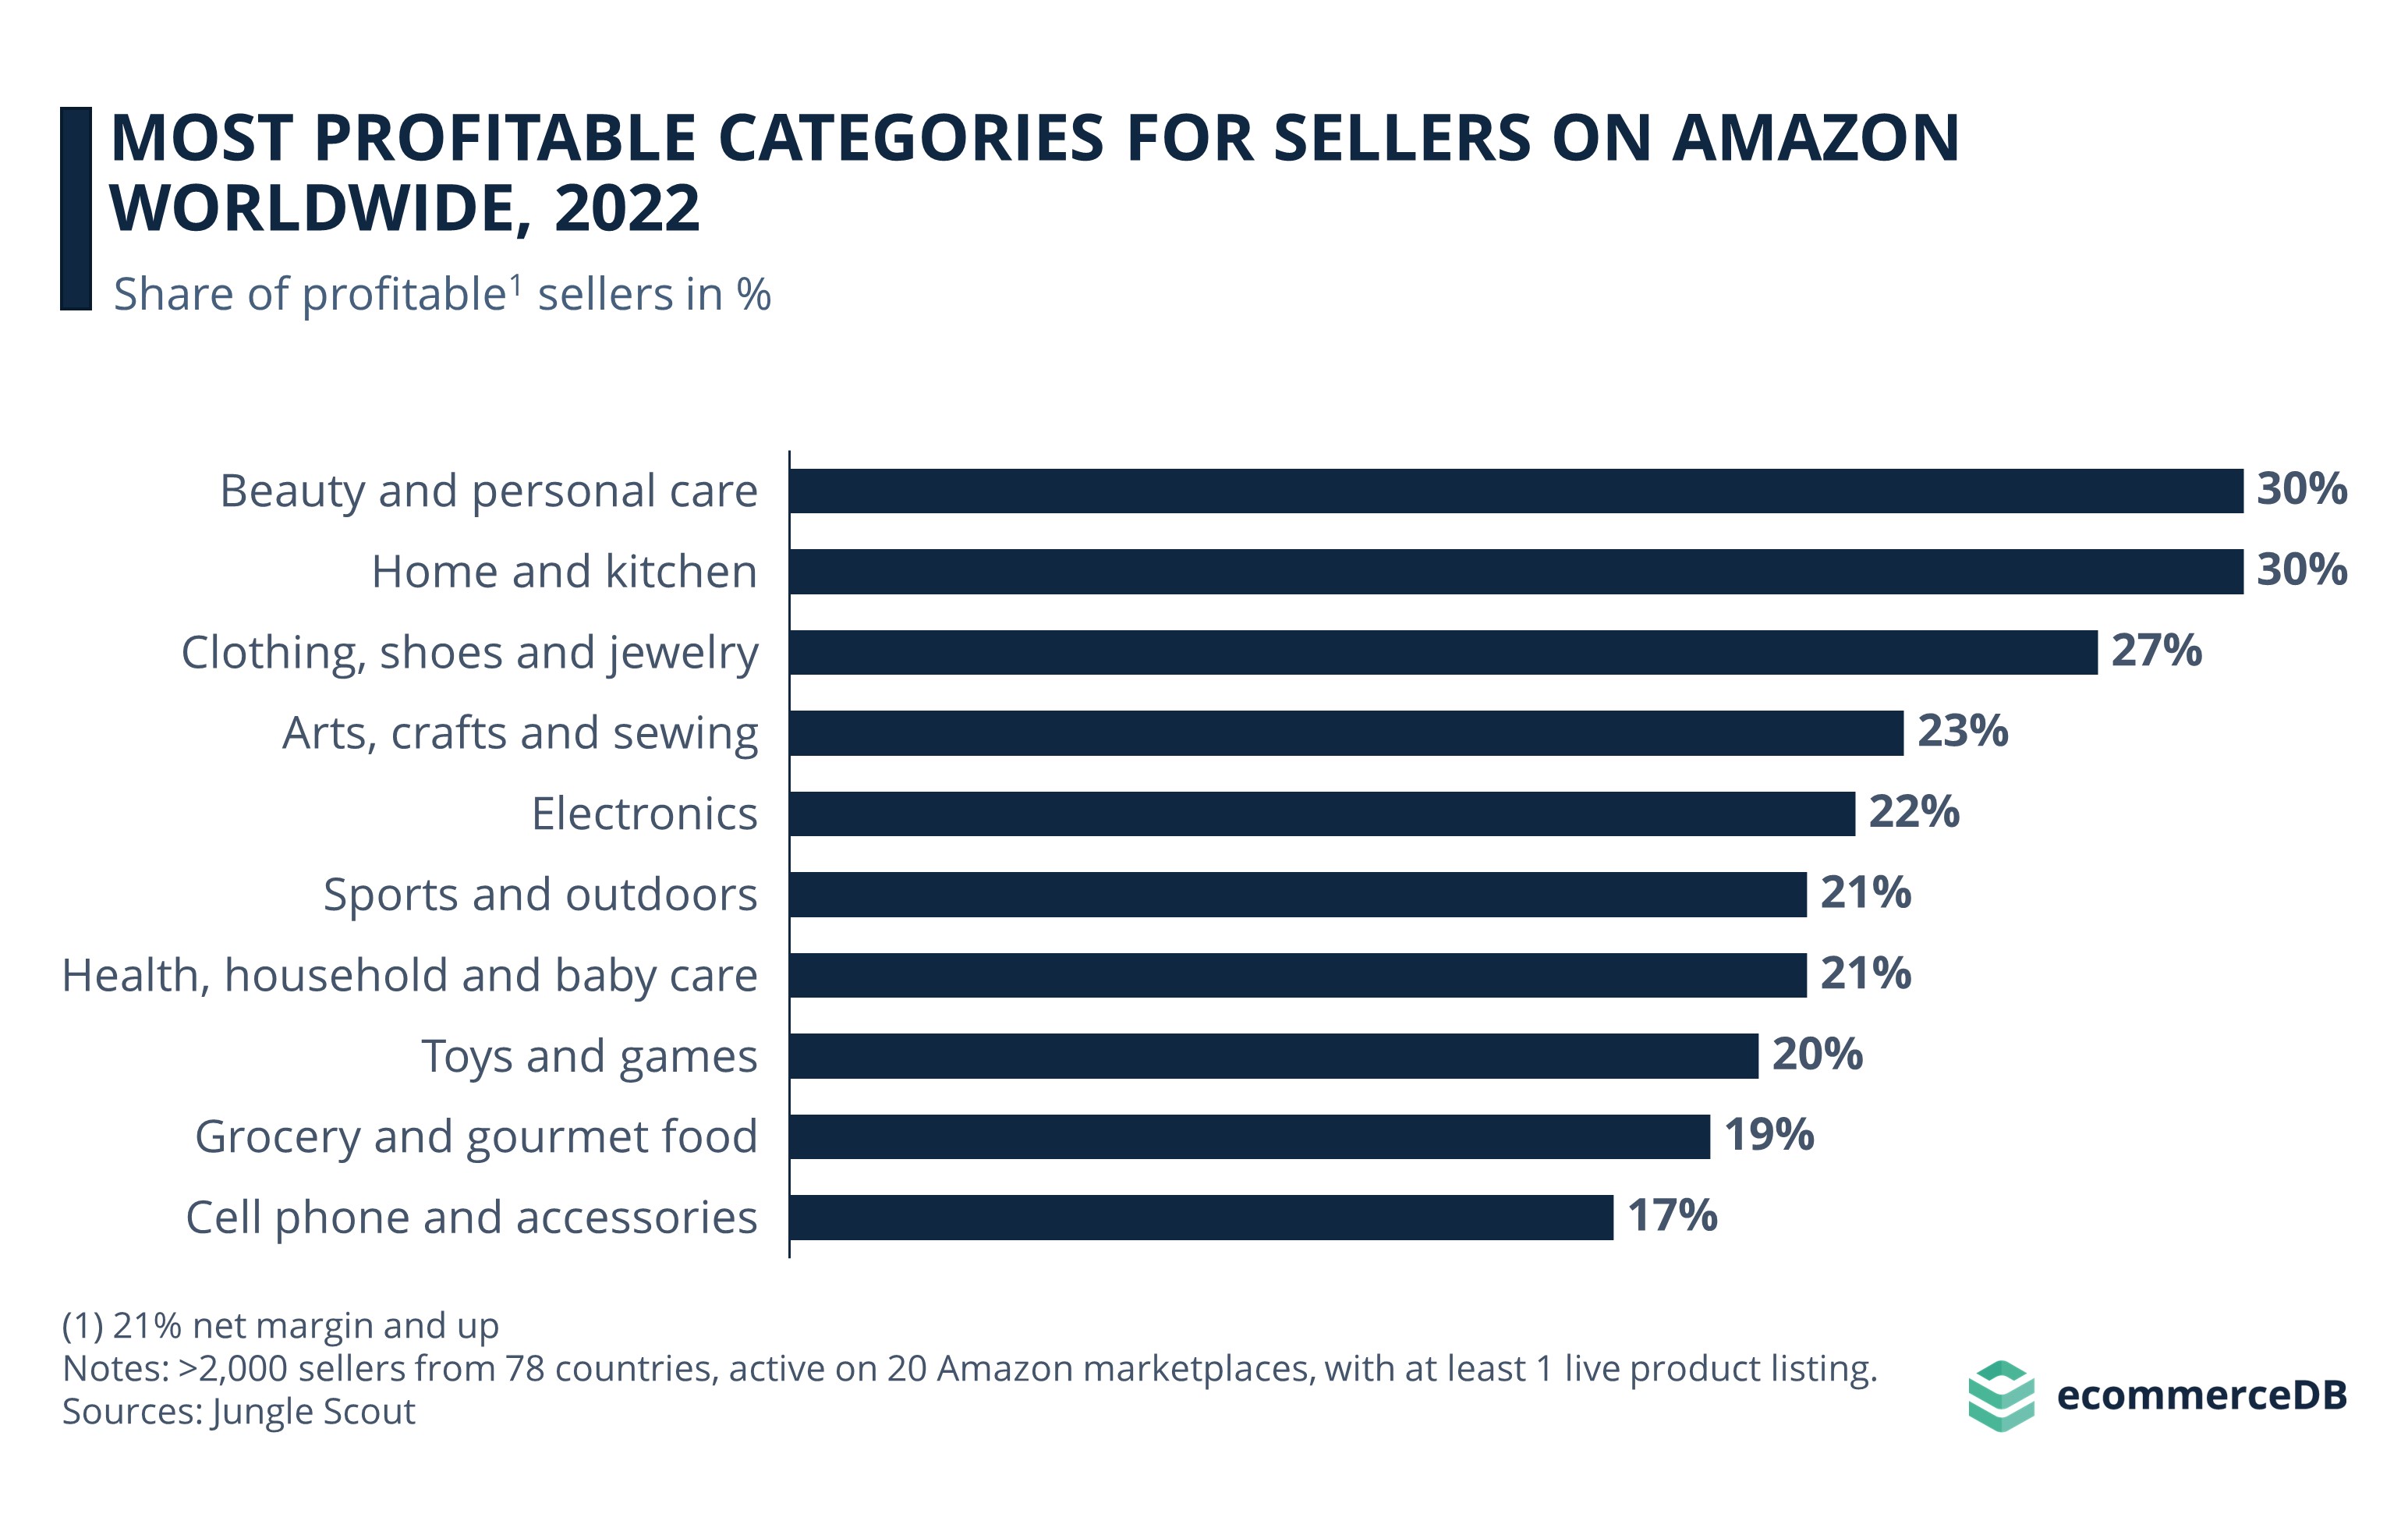 Most Profitable Categories for Sellers on Amazon Worldwide, 2022